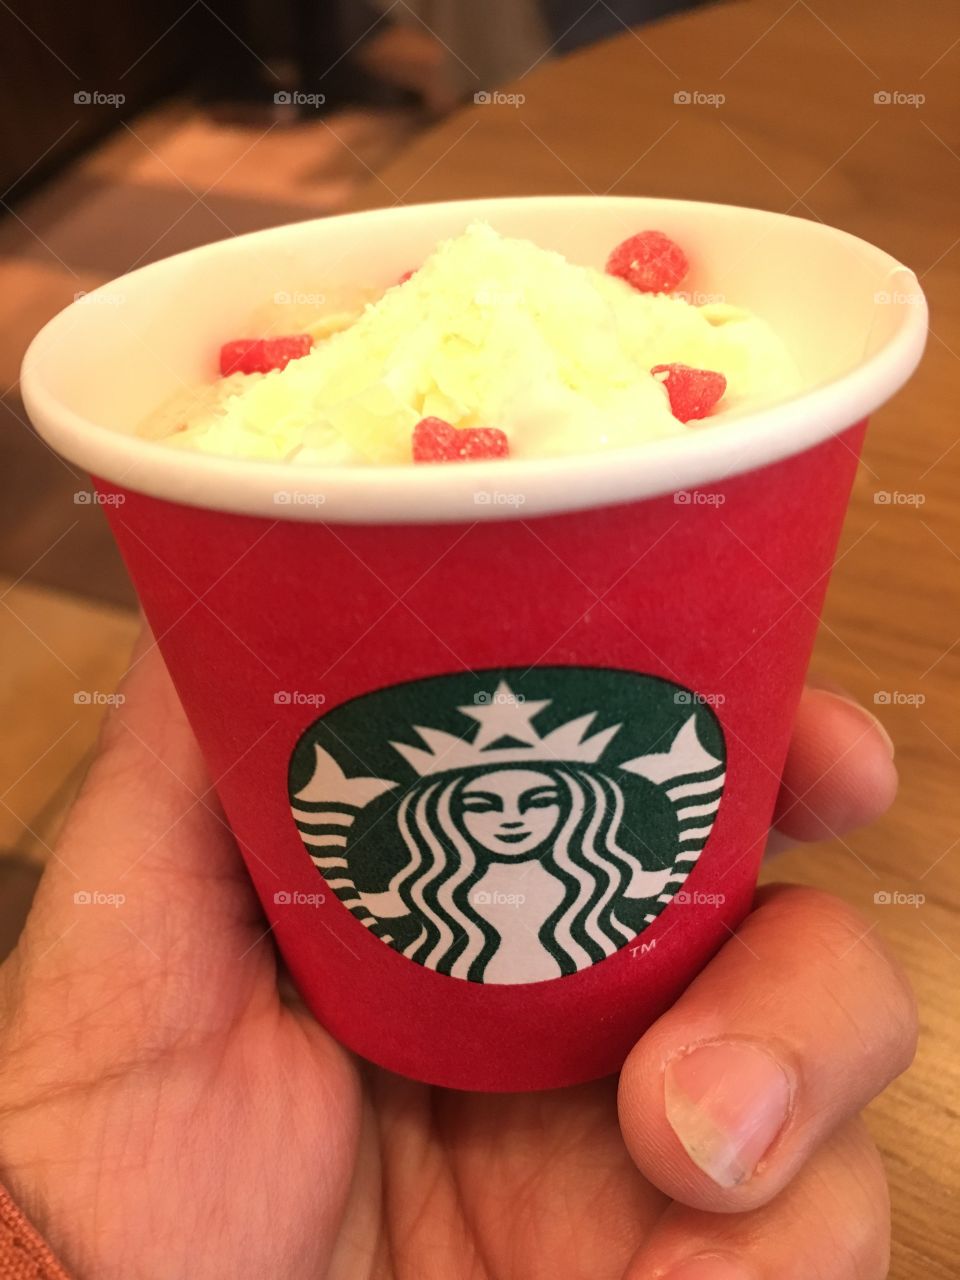 A little cup of sweetness.